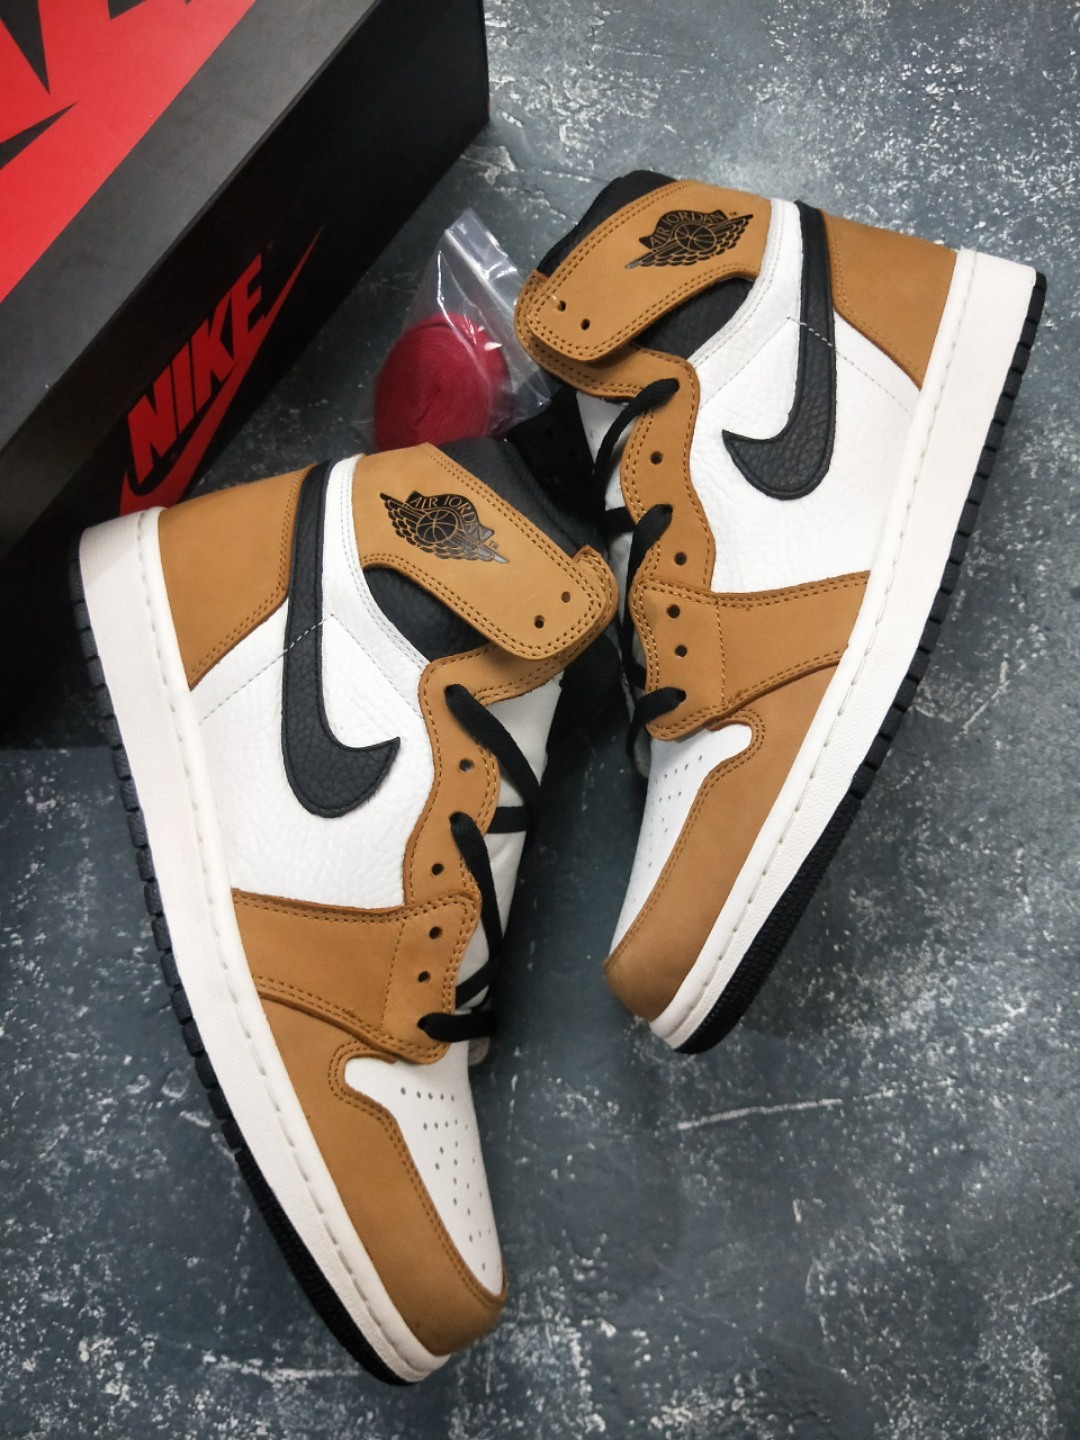 High Quality Air Jordan 1 rookie of the year best version in the market ready to ship